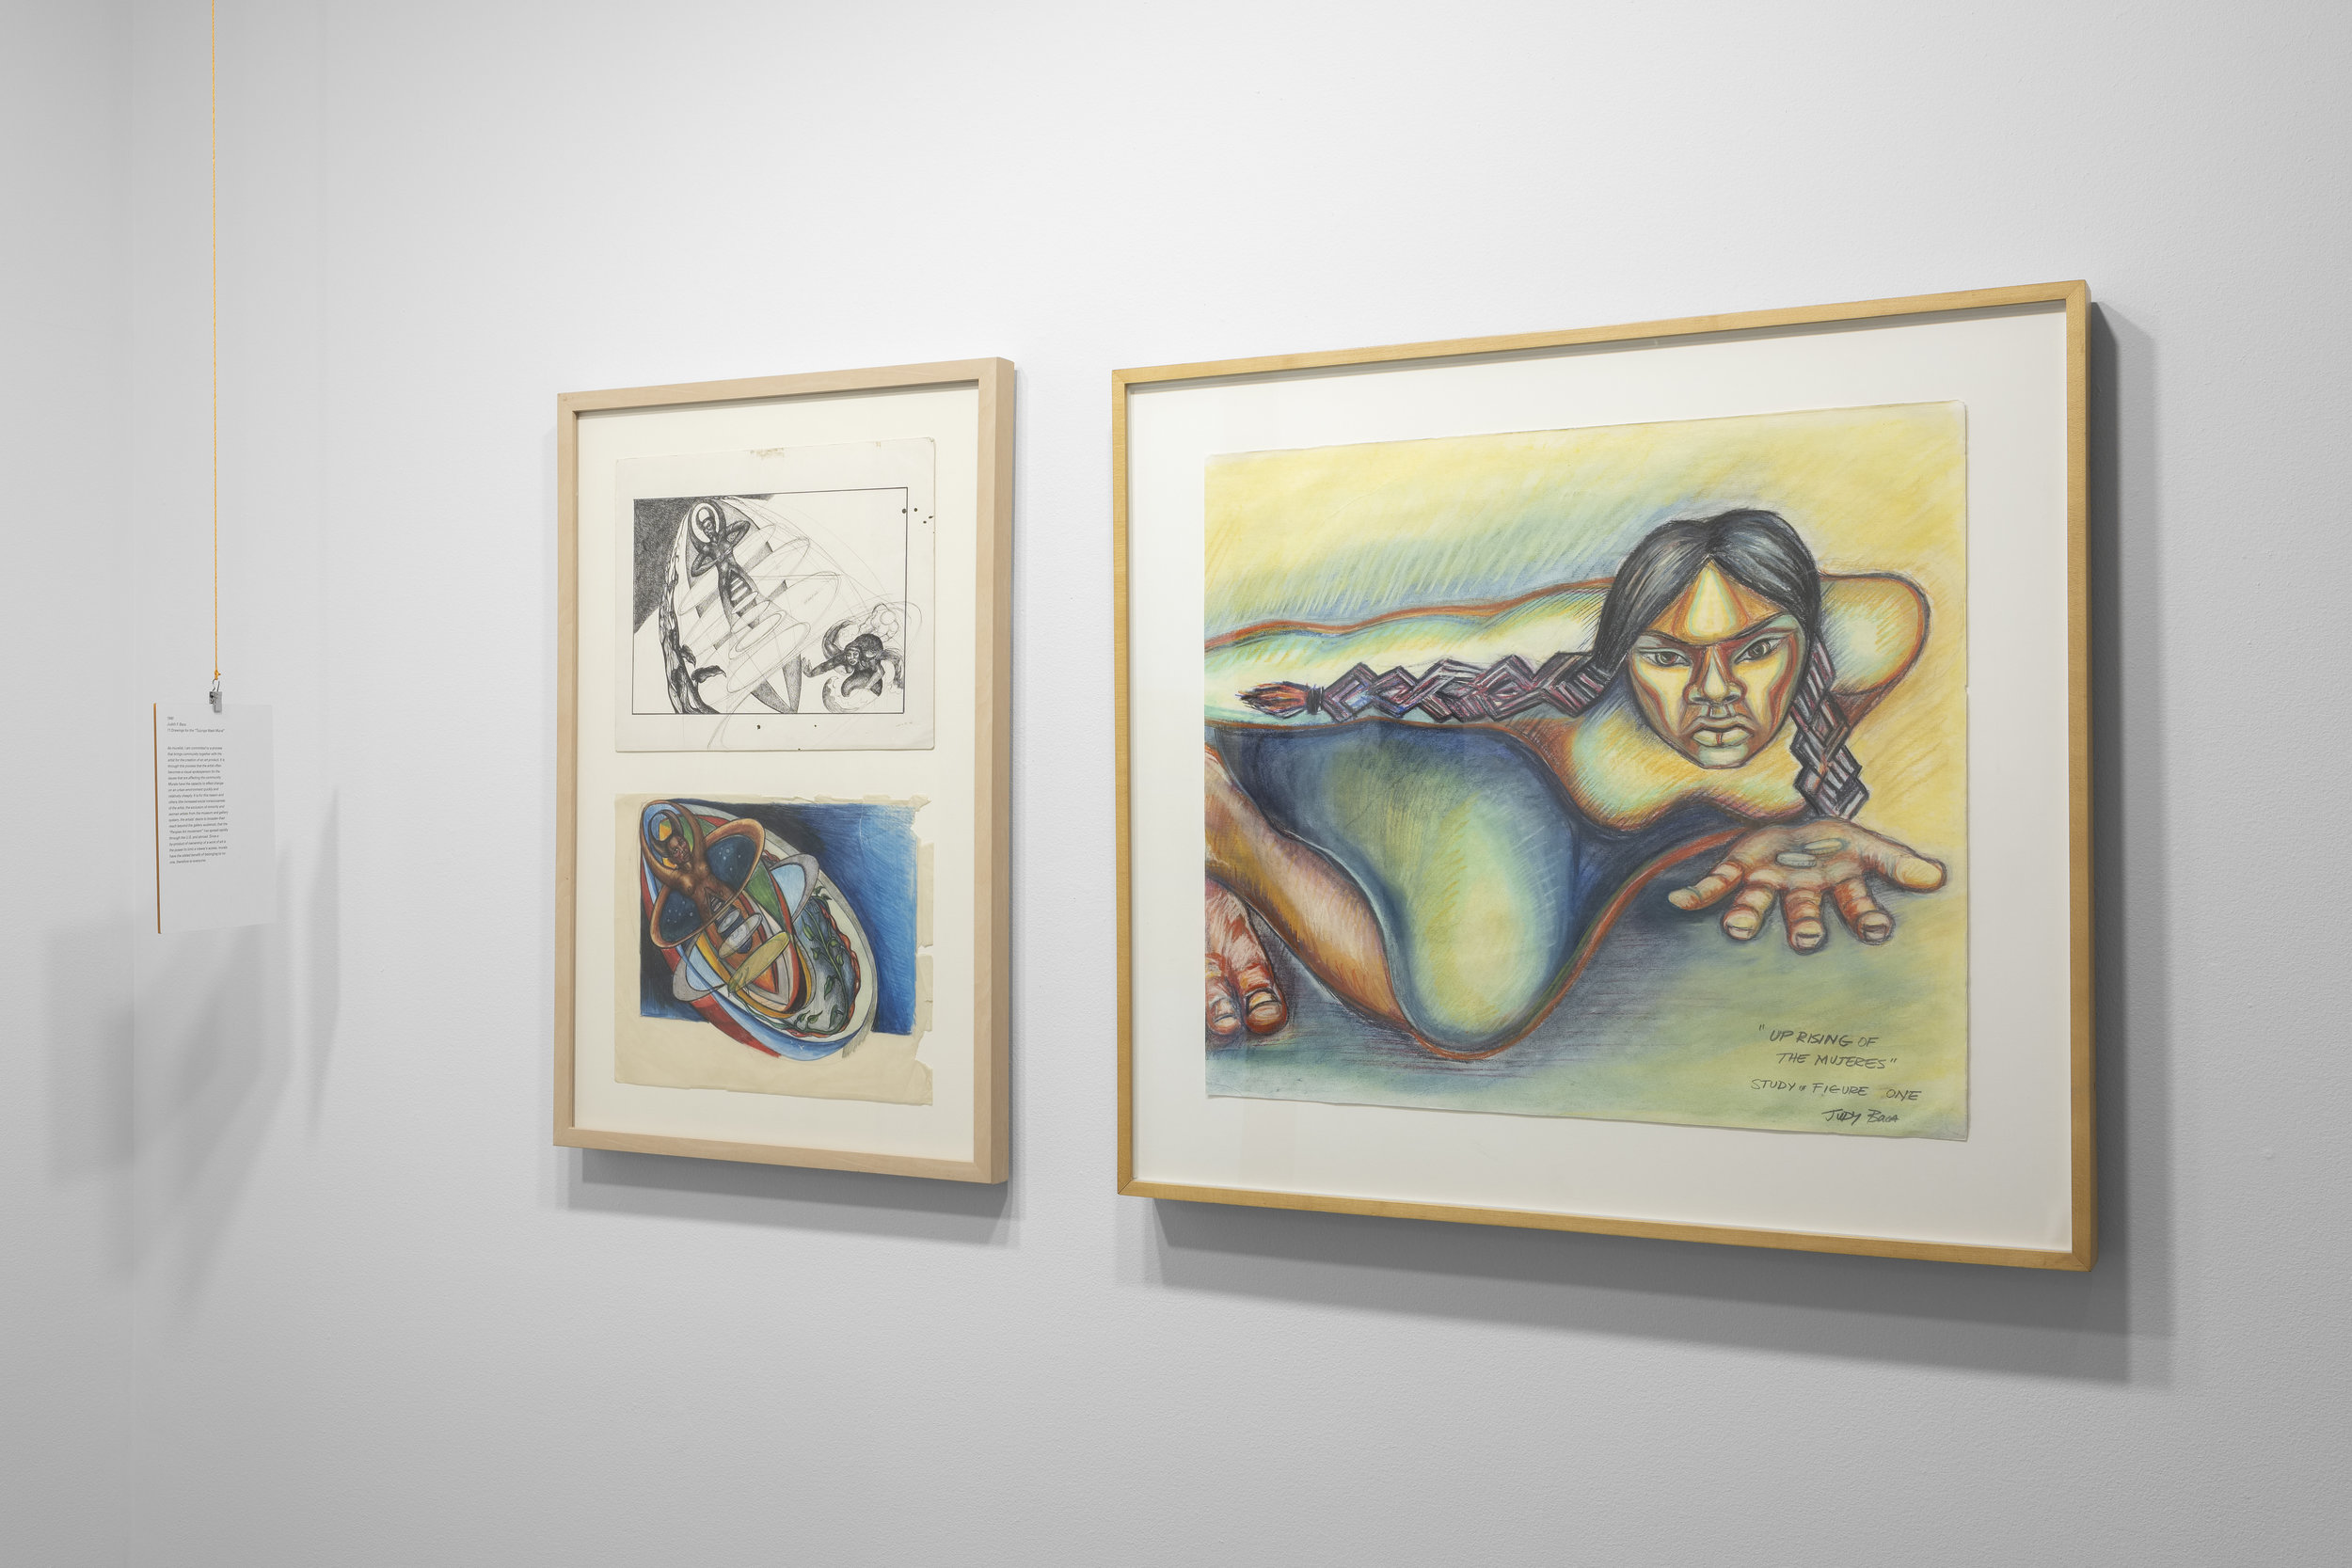 Judith Baca, "When God Was Woman," 1982 (left) and Judith Baca "Uprising of the Mujeres," 1979.